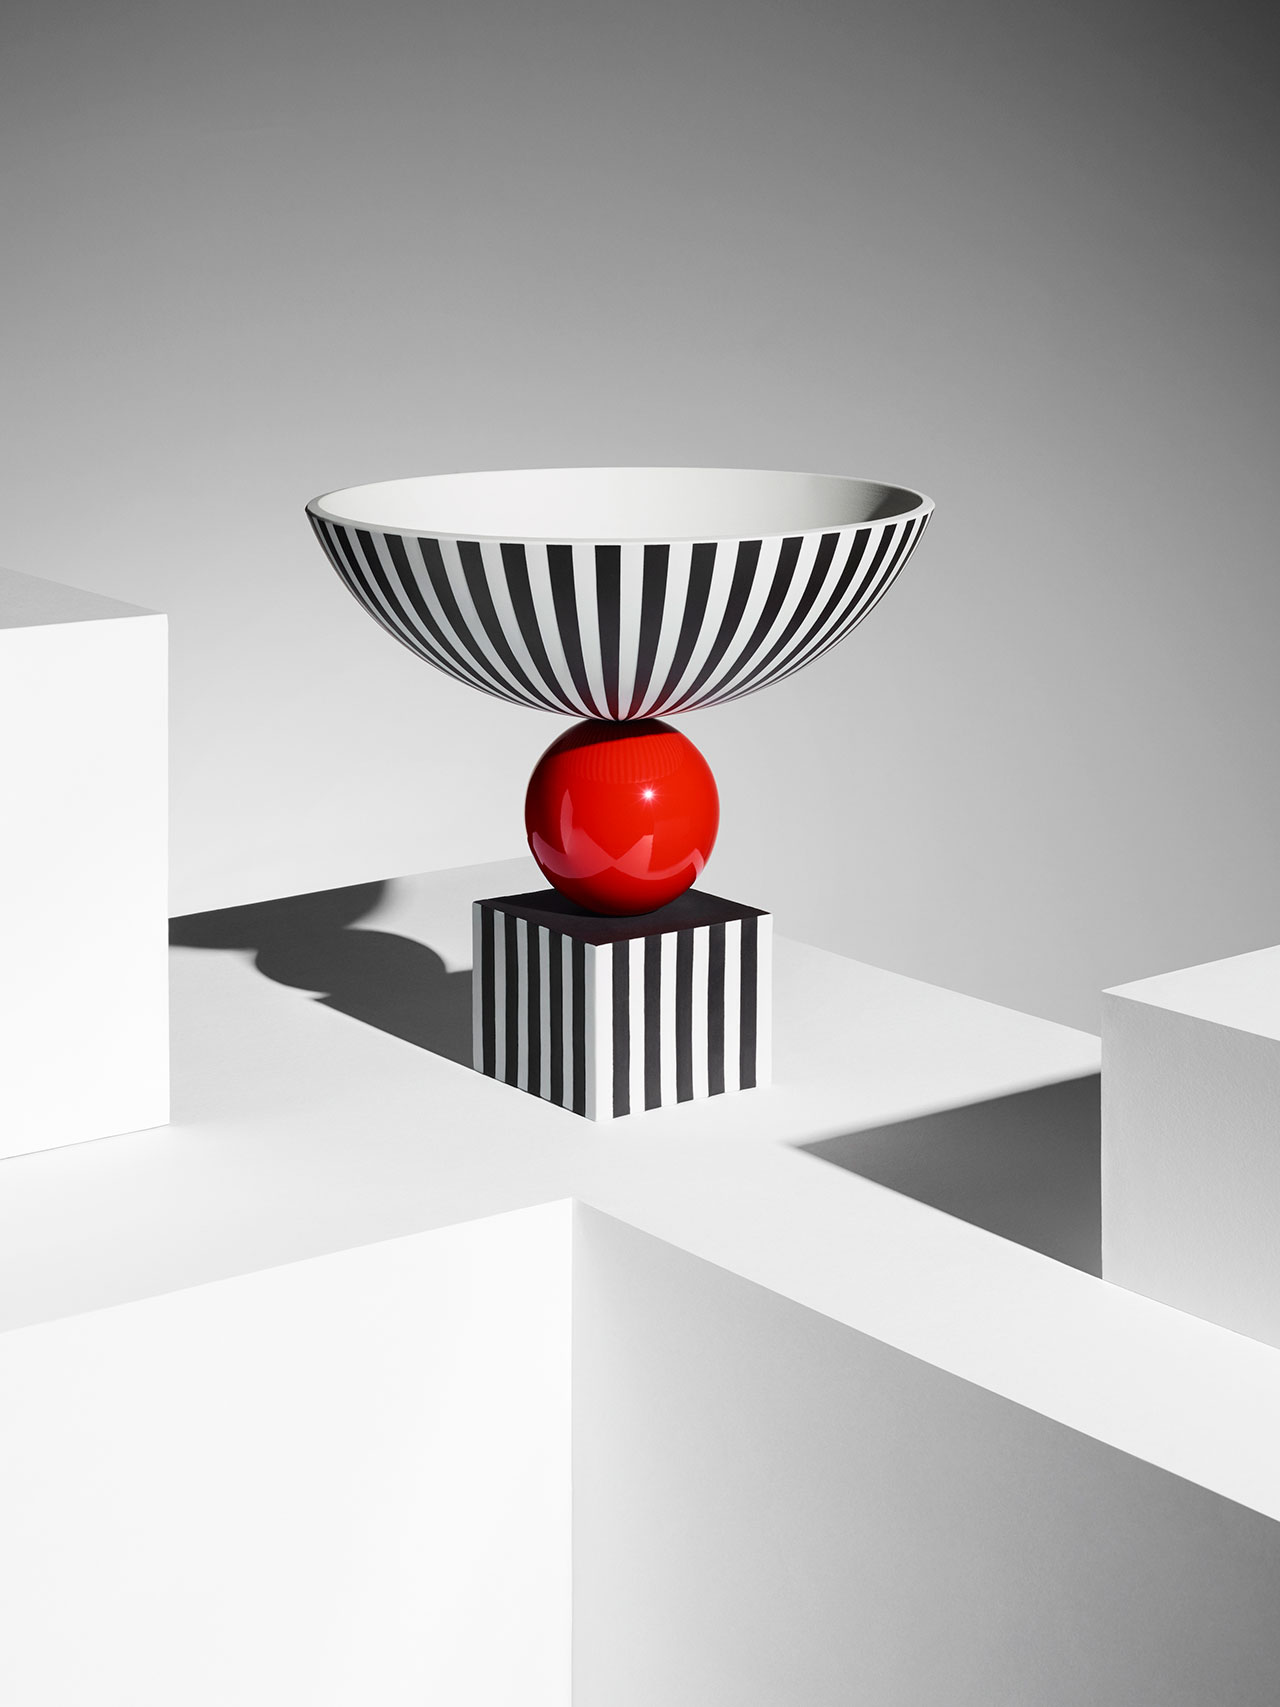 Wedgwood by Lee Broom, Bowl On Red Sphere. Photo by Michael Bodiam.